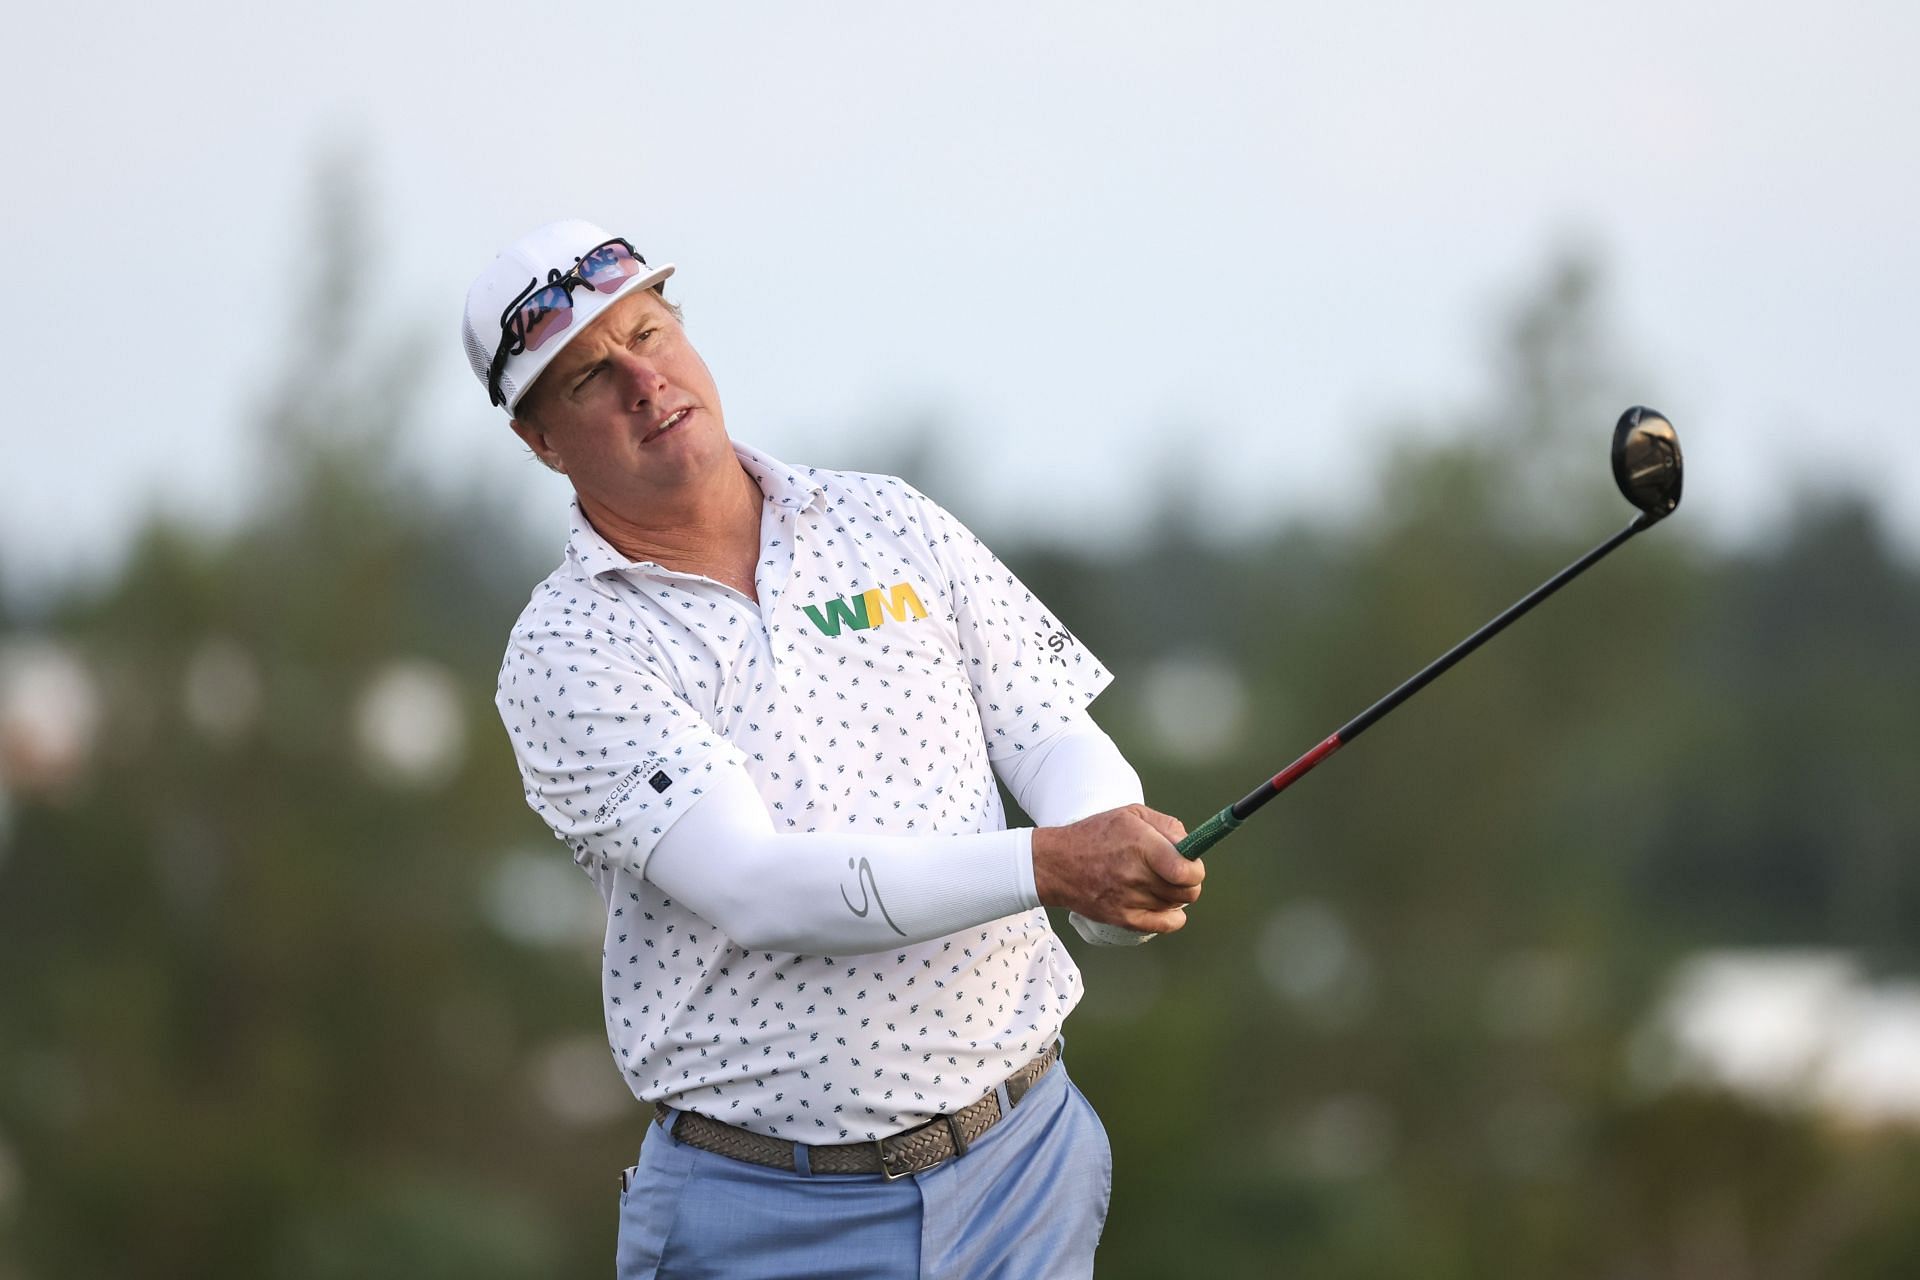 Charley Hoffman (Image via Gregory Shamus/Getty Images)